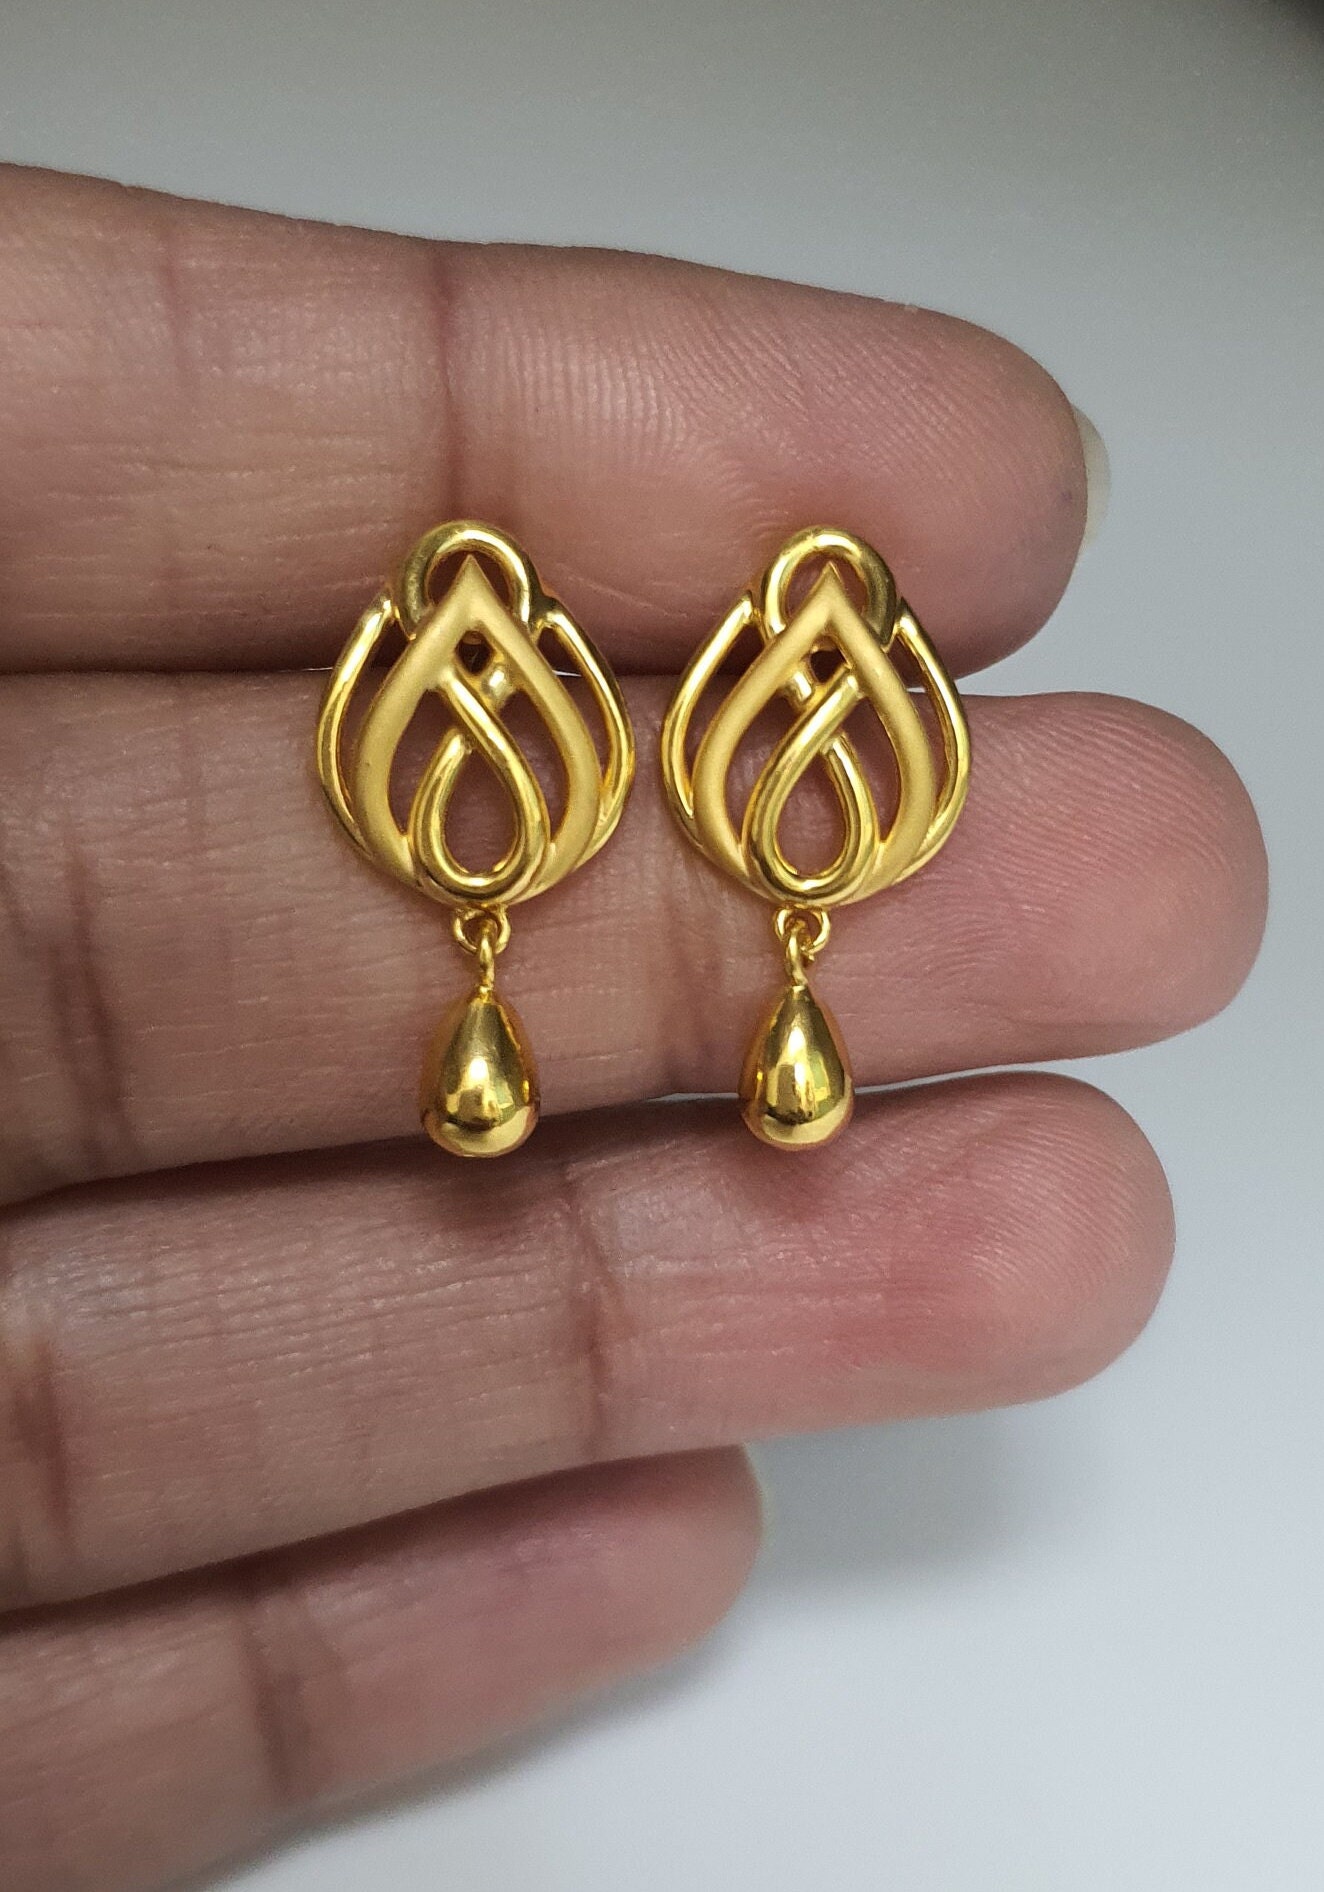 light weight gold earrings designs in 2 grams – Simple Craft Idea